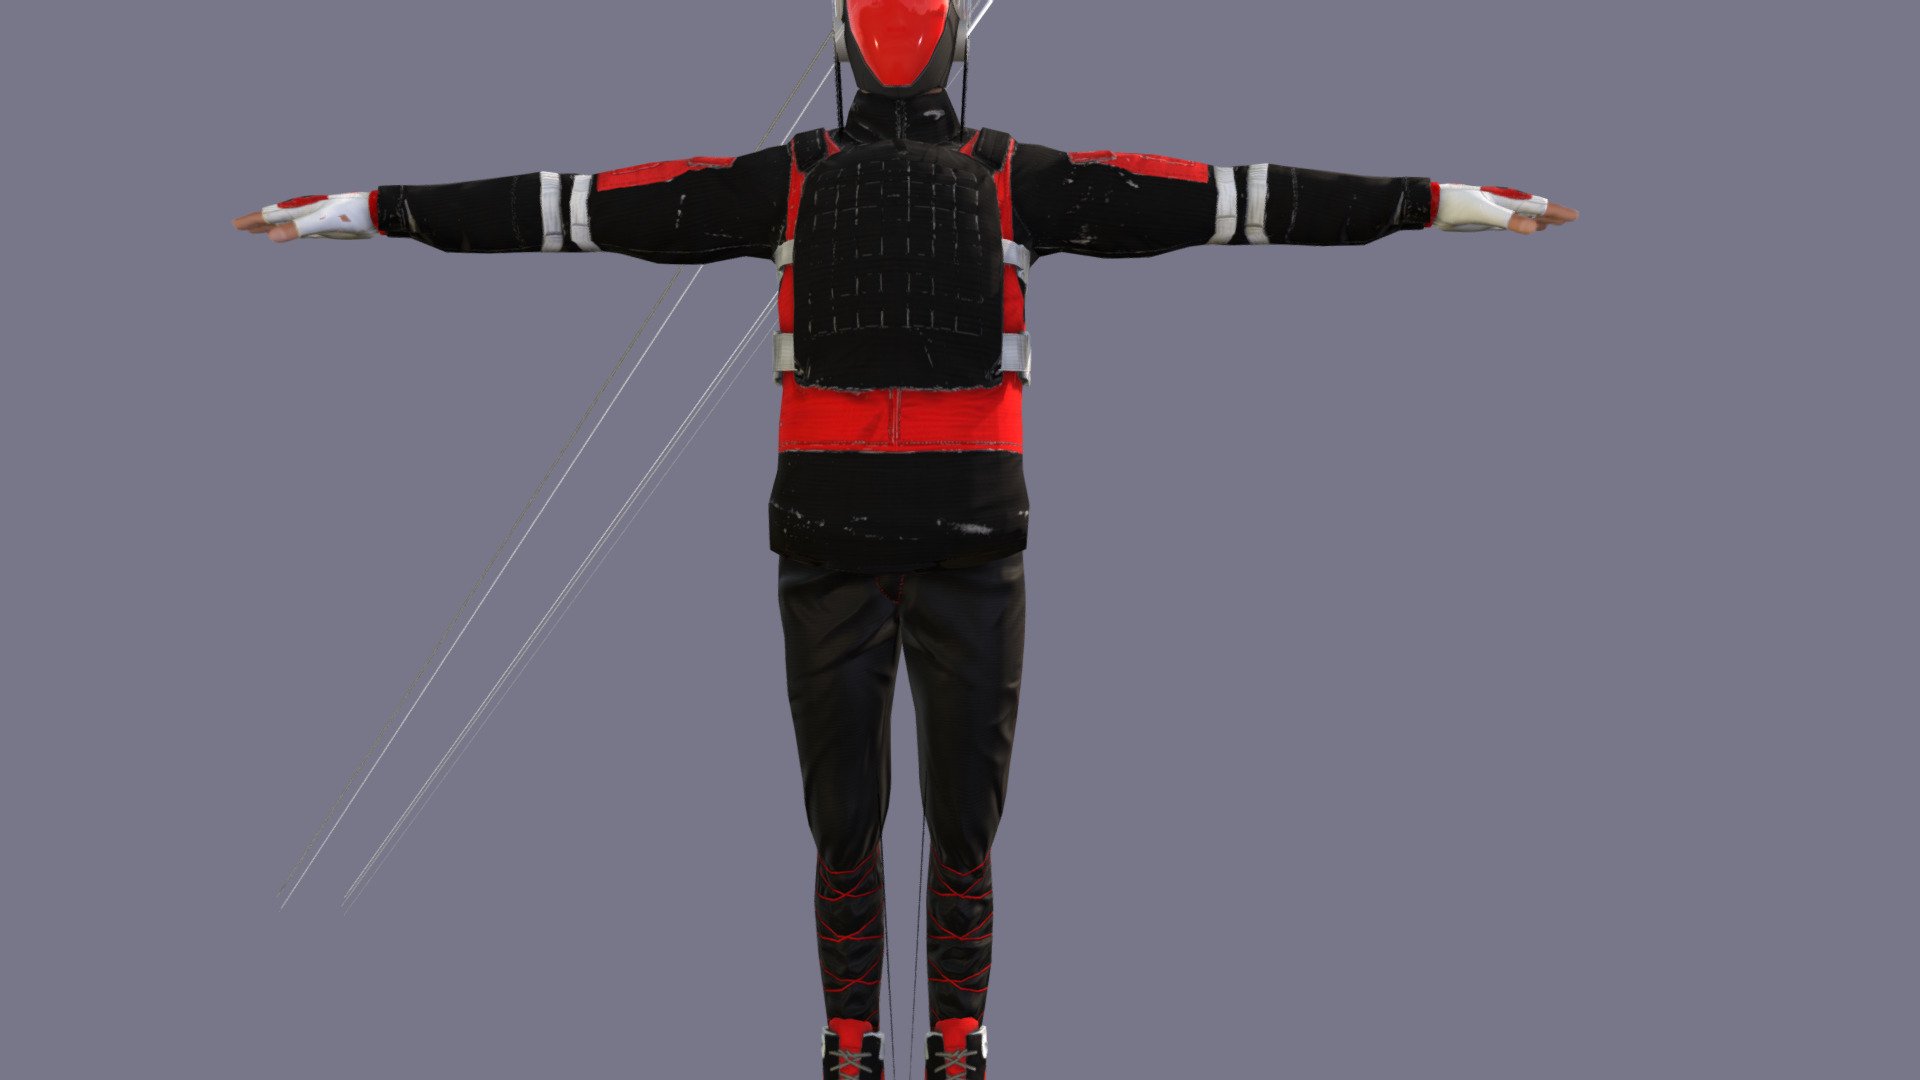 Here's the Completed Suit with the Re-enforced Glass Front Helmet, slightly transparent, with signal receptors built in to the ears like shaped headpiece.
It allows for maximum viewing, with a clear point out for obstacles that may come in the way while snowboarding.
The suit is also well designed to protect the wearer considerably should they fall off their board 3d model